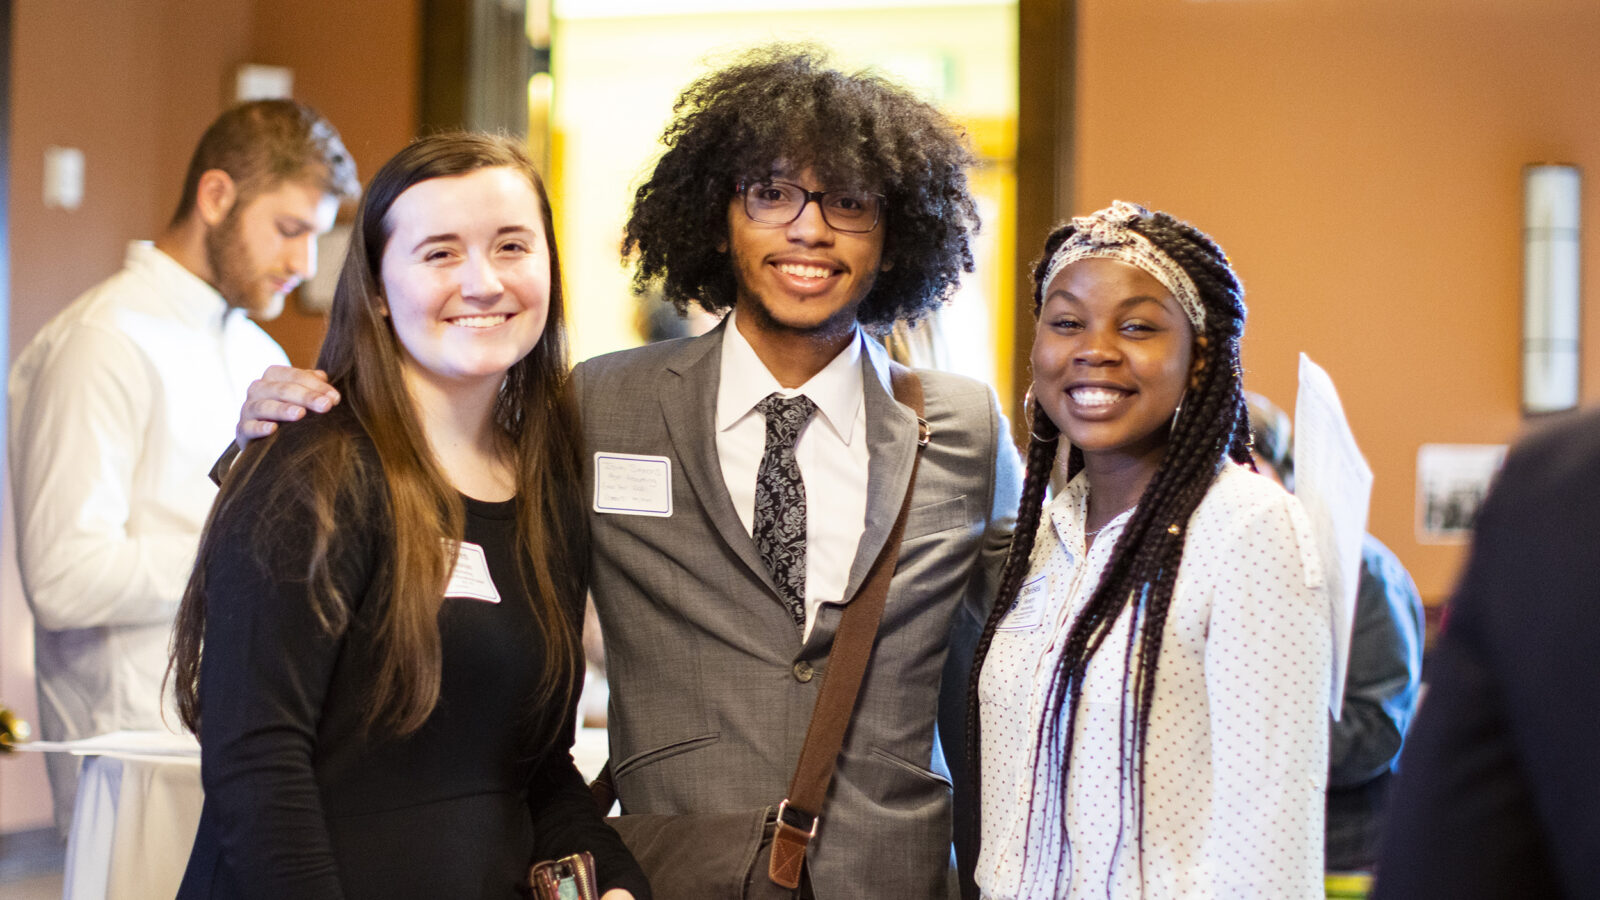 three students at networking event pose for camera